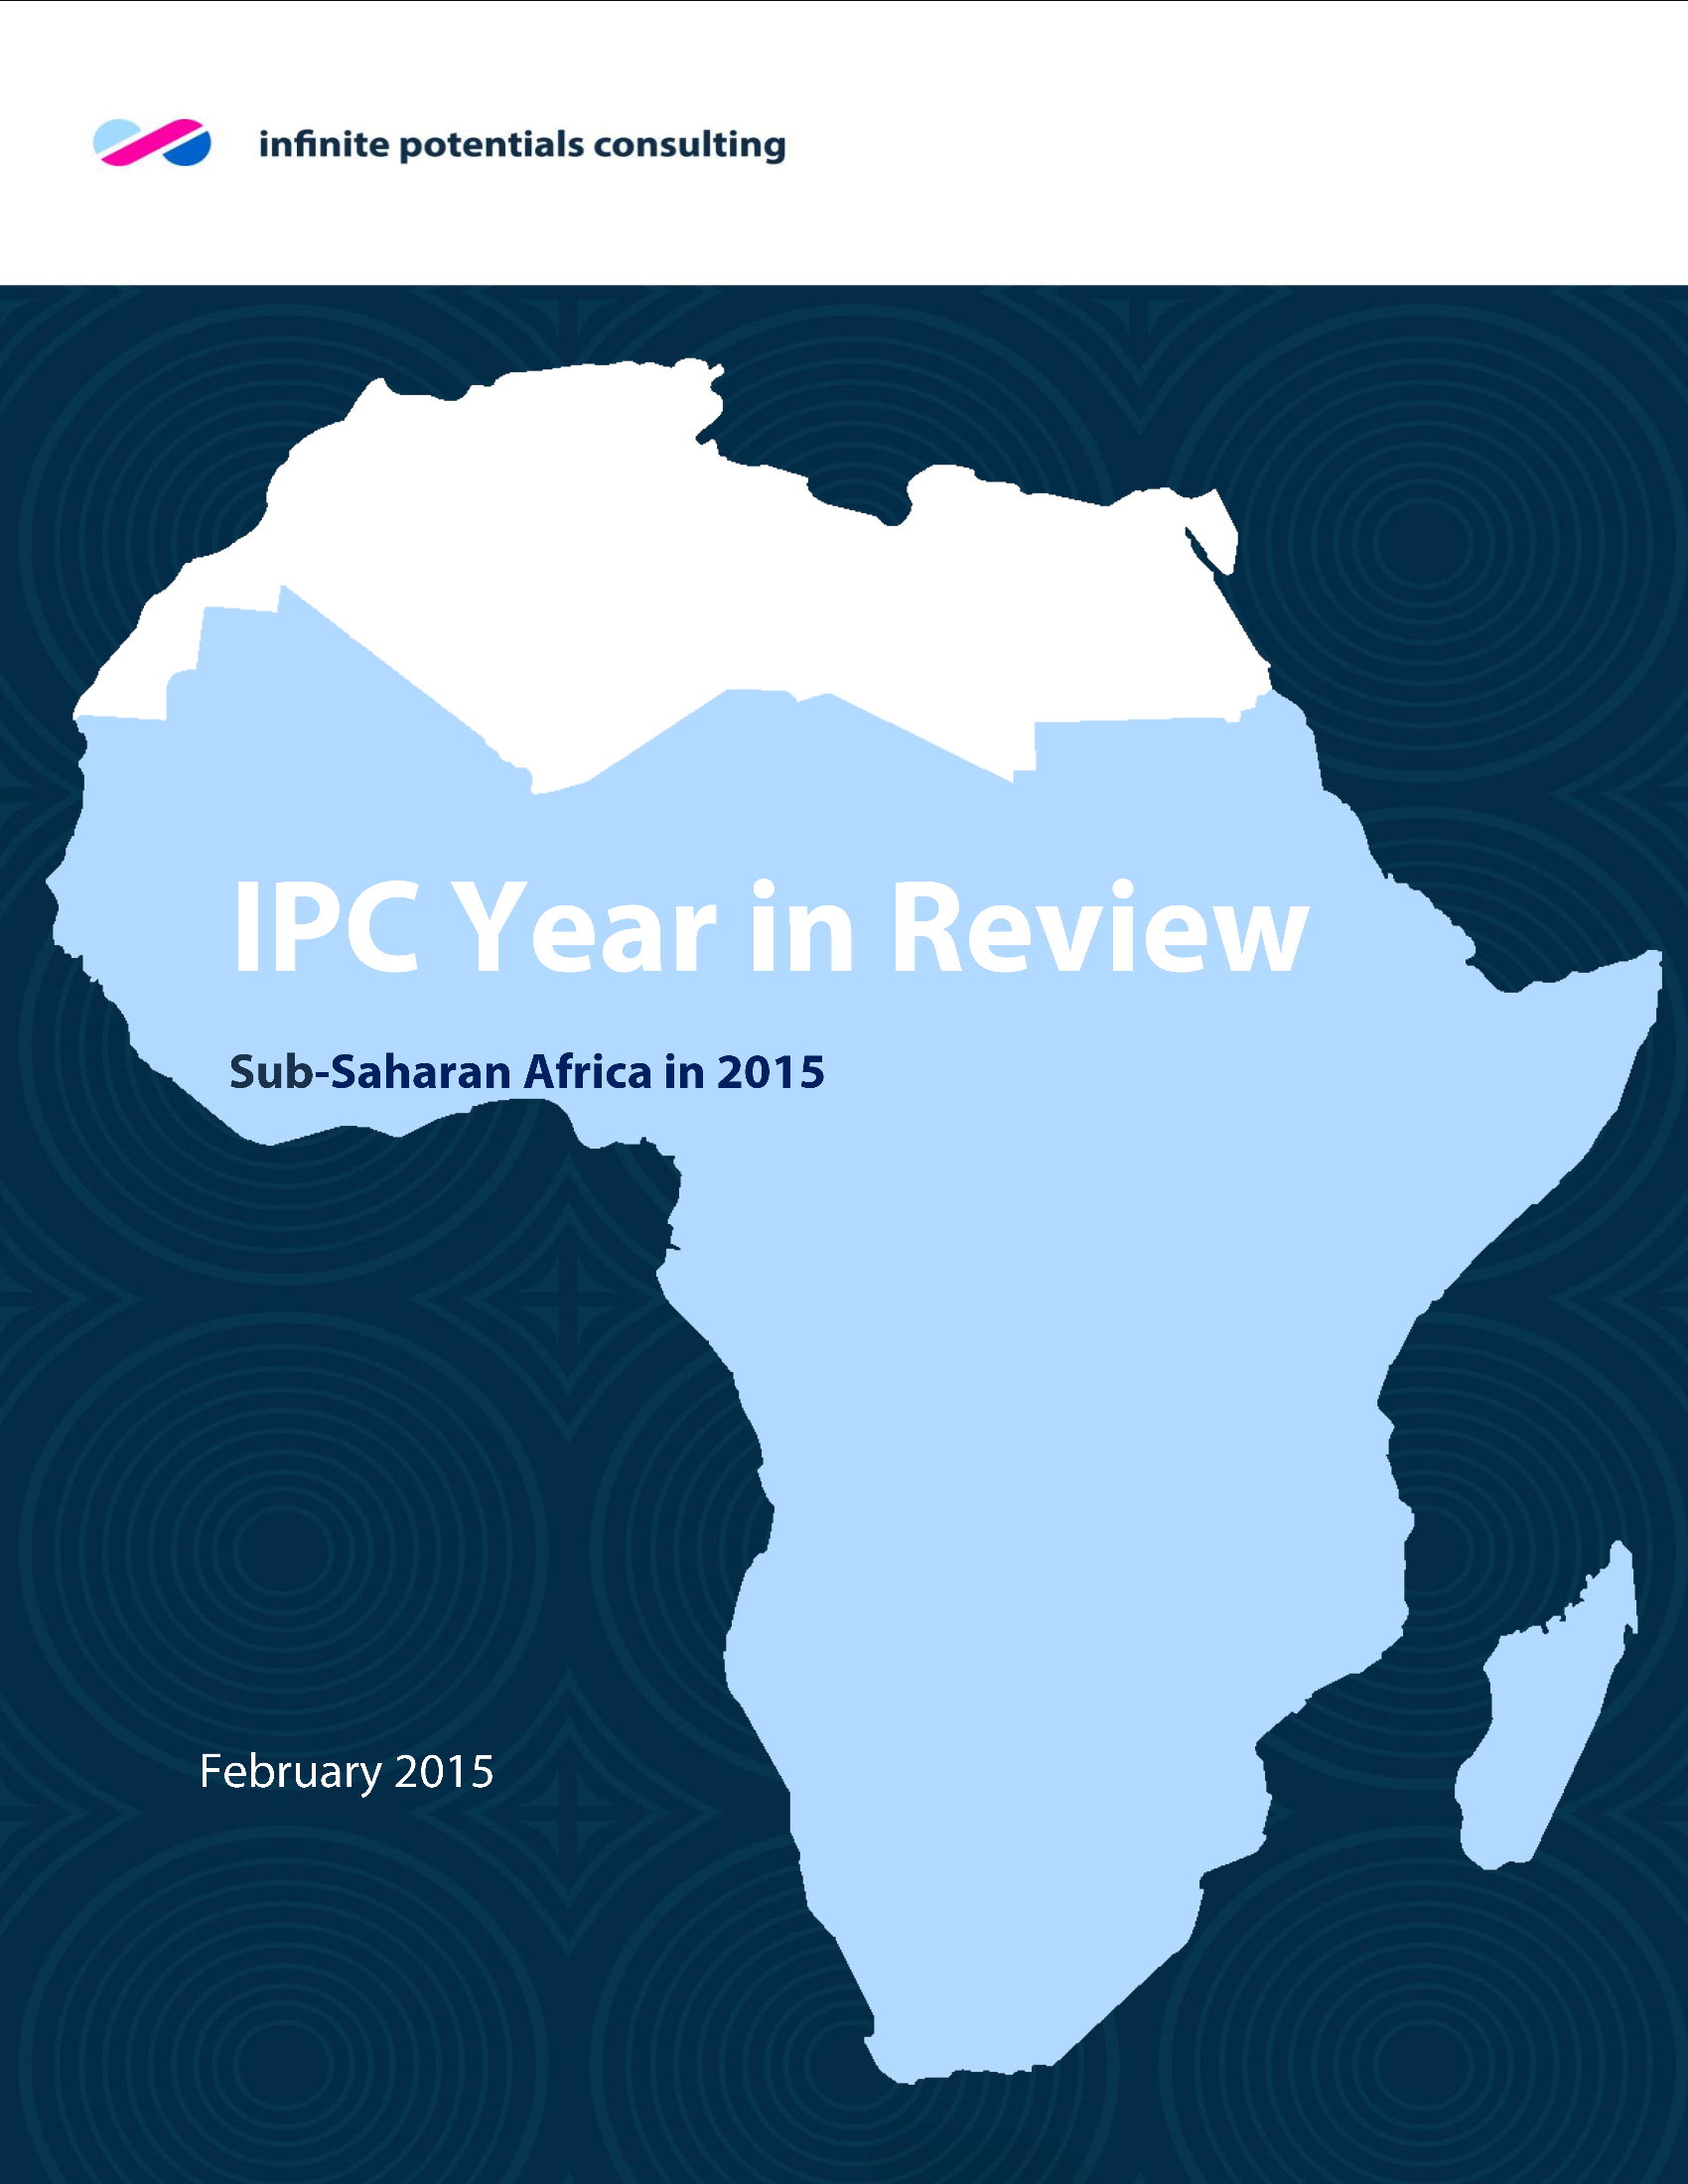 Sub-Saharan Africa’s 8 key investment opportunities in 2015